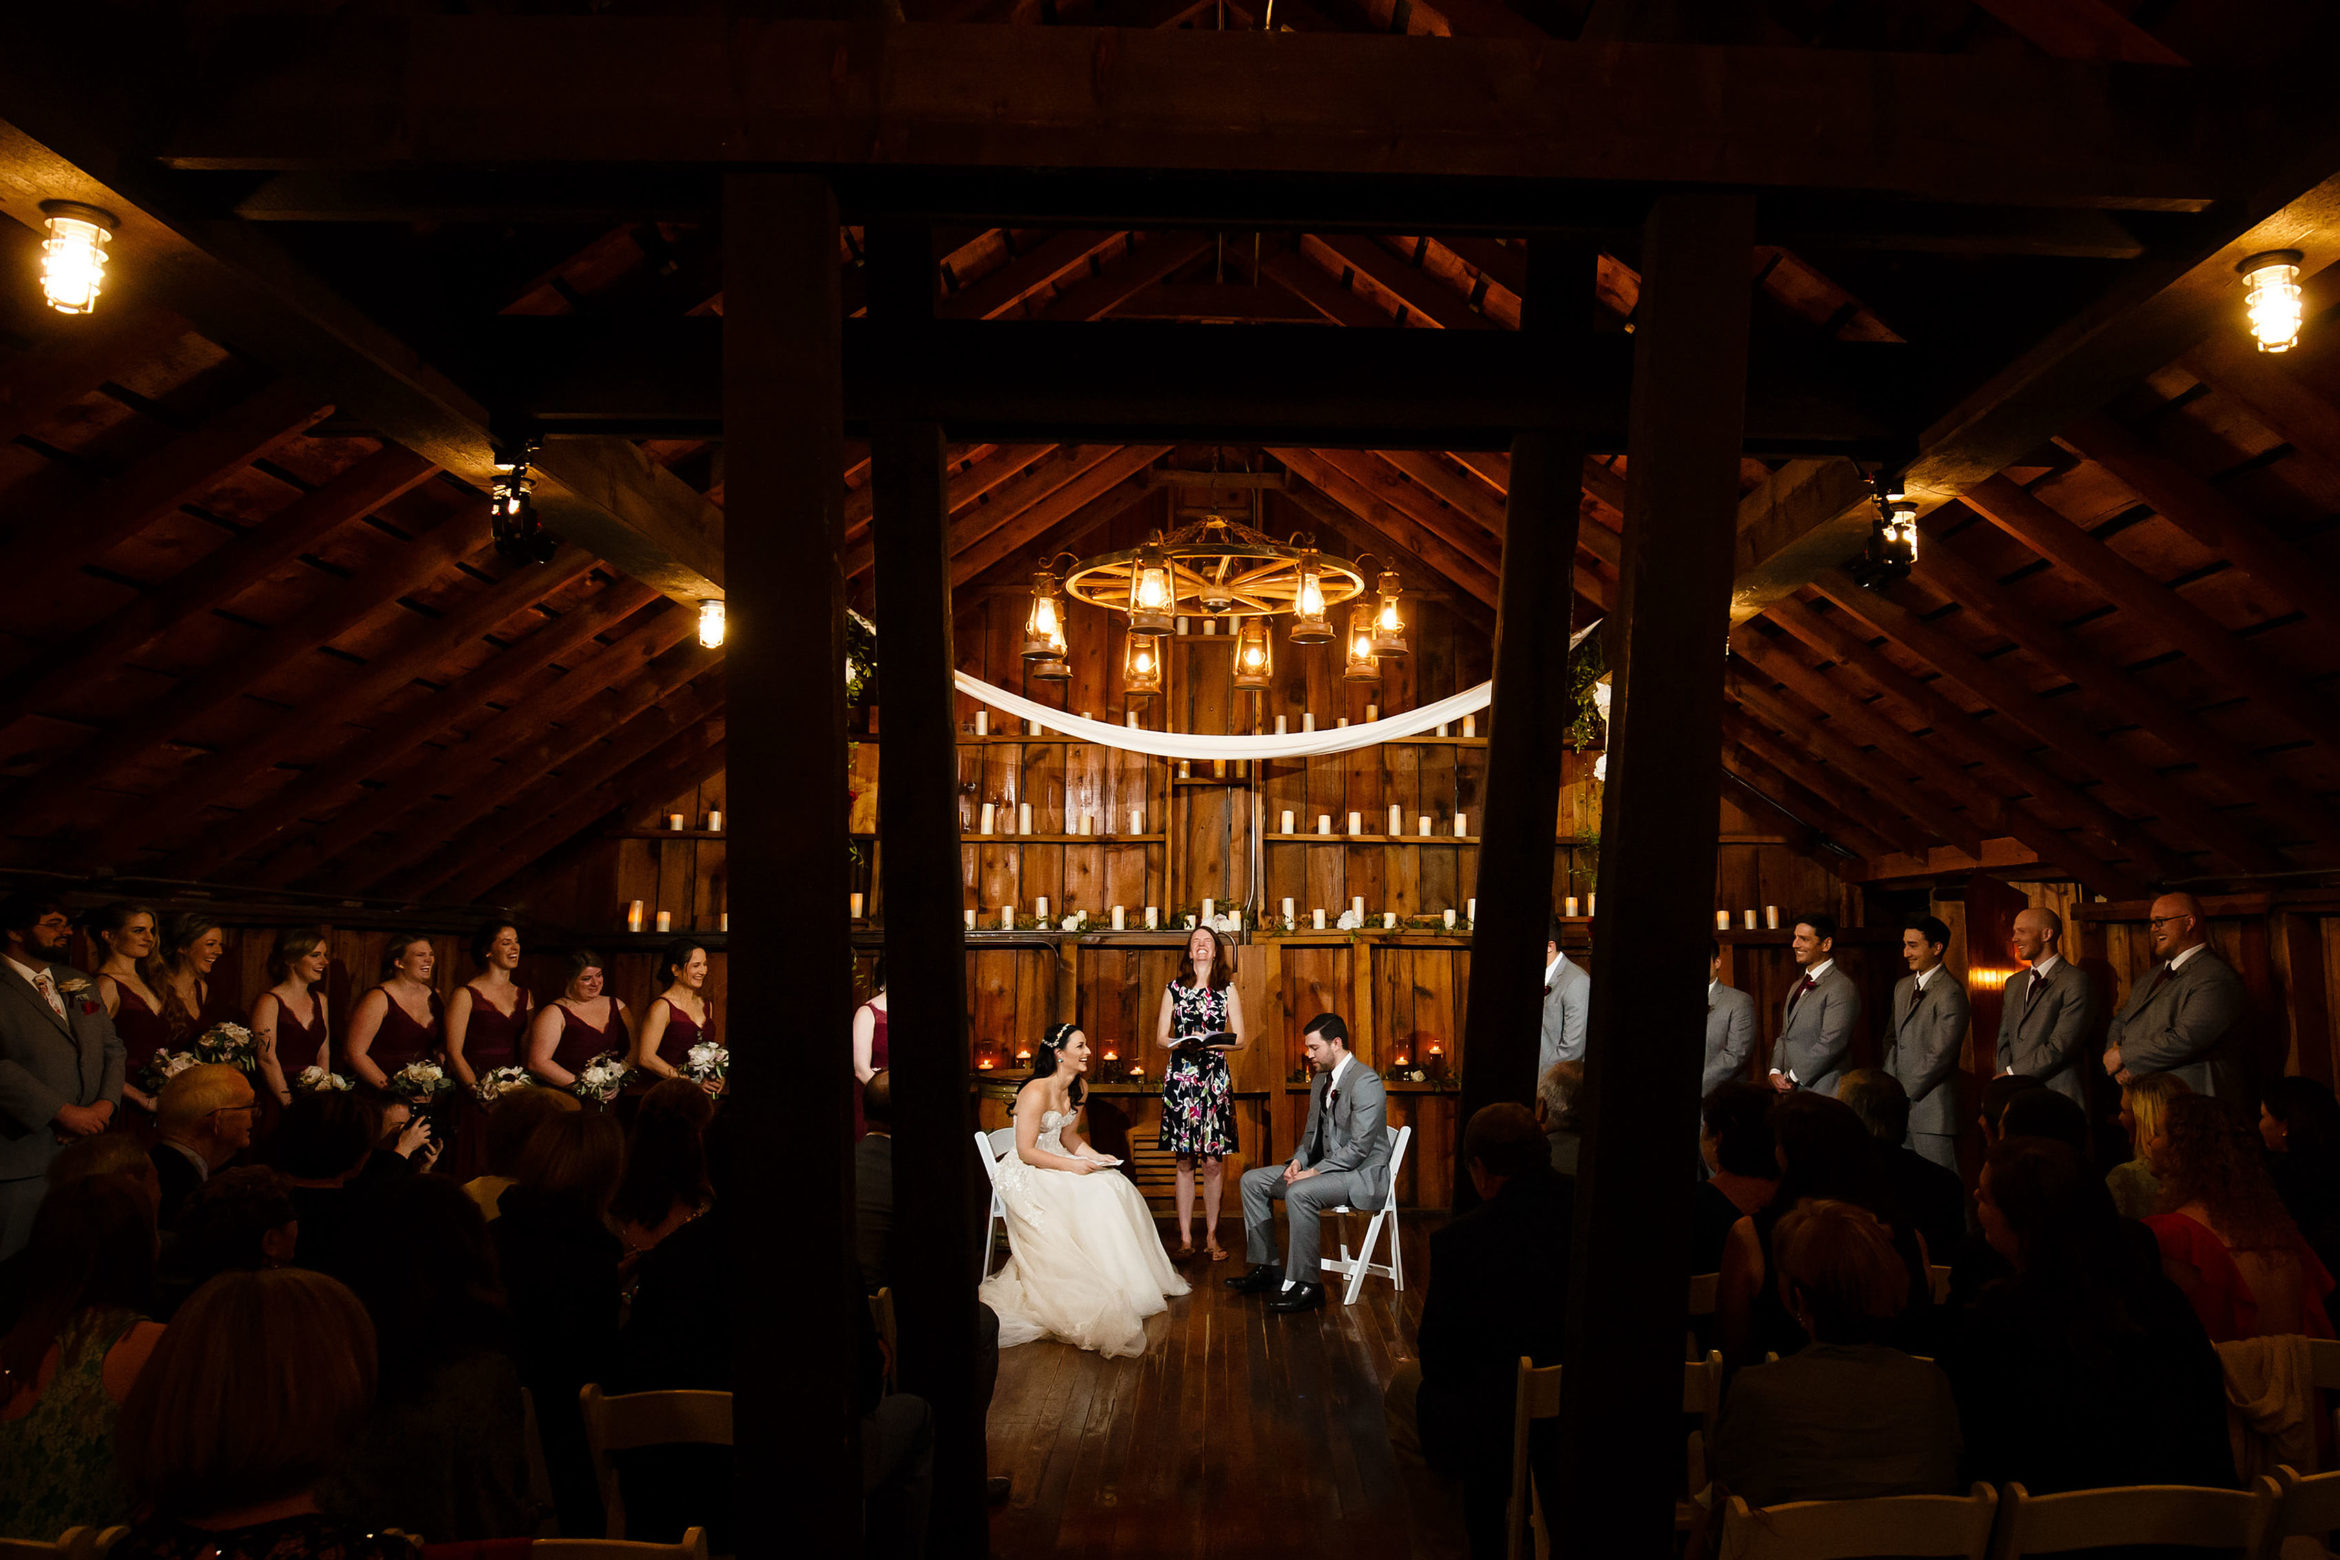 Wedding ceremony in Lola's Loft at Crooked Willow Farms